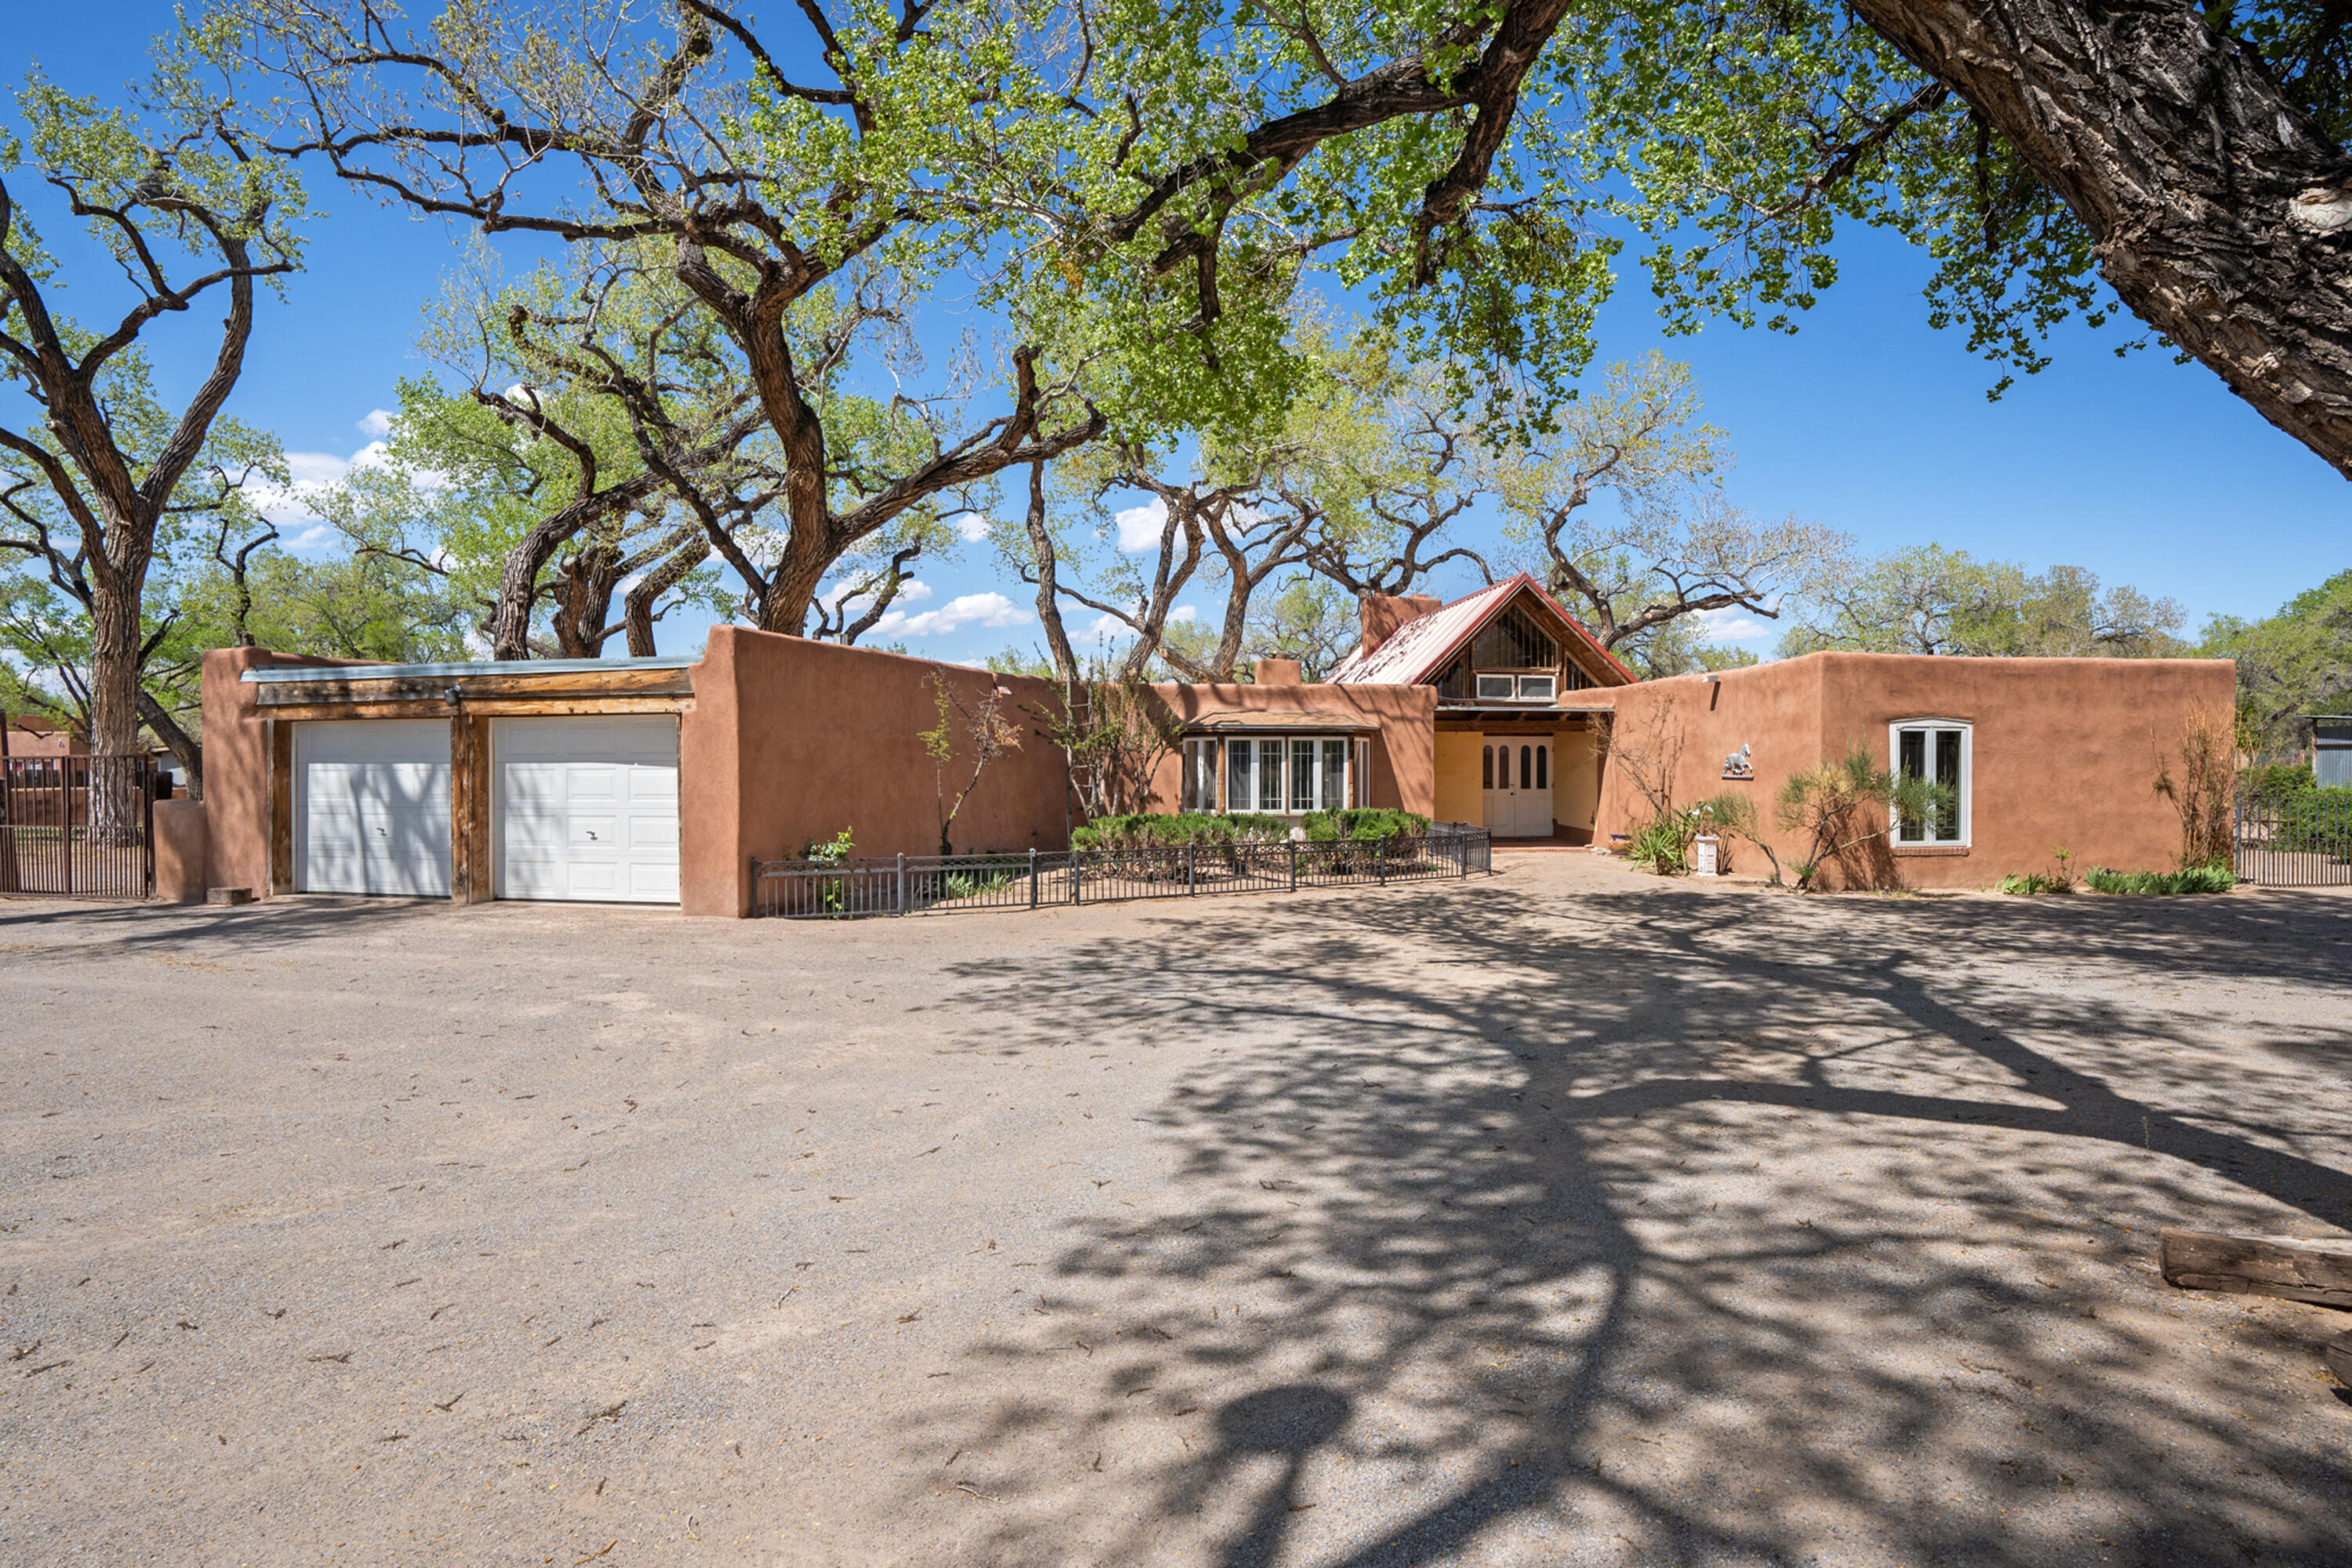 Corrales Tranquility!  Eastside Bosque location! This exceptional 7.22 acre property has been the home of Tamarisk Farms an equestrian property.Nestled under the cottonwoods is a 3200sf adobe designed by George Pearl, & a 884sf one BR casita.  Good bones, needs update. A well designed center island 5 stall barn w/runs, tack room, wash rack, & a carport for hay storage.  A separate building for hay storage or equipment.  3 large turn outs w/run in's, app. 60 X 180. each.  Pasture, and immediate access to the trail system & the 633 acre Corrales Bosque Preserve.  Gated entry from Quail Trail & a separate entry from Bosque Road.  Northside of property is Cottonwoods w/a 10 ' access for neighbors to access open space. Come fall in love!  This is truly the best of what Corrales has to offer.